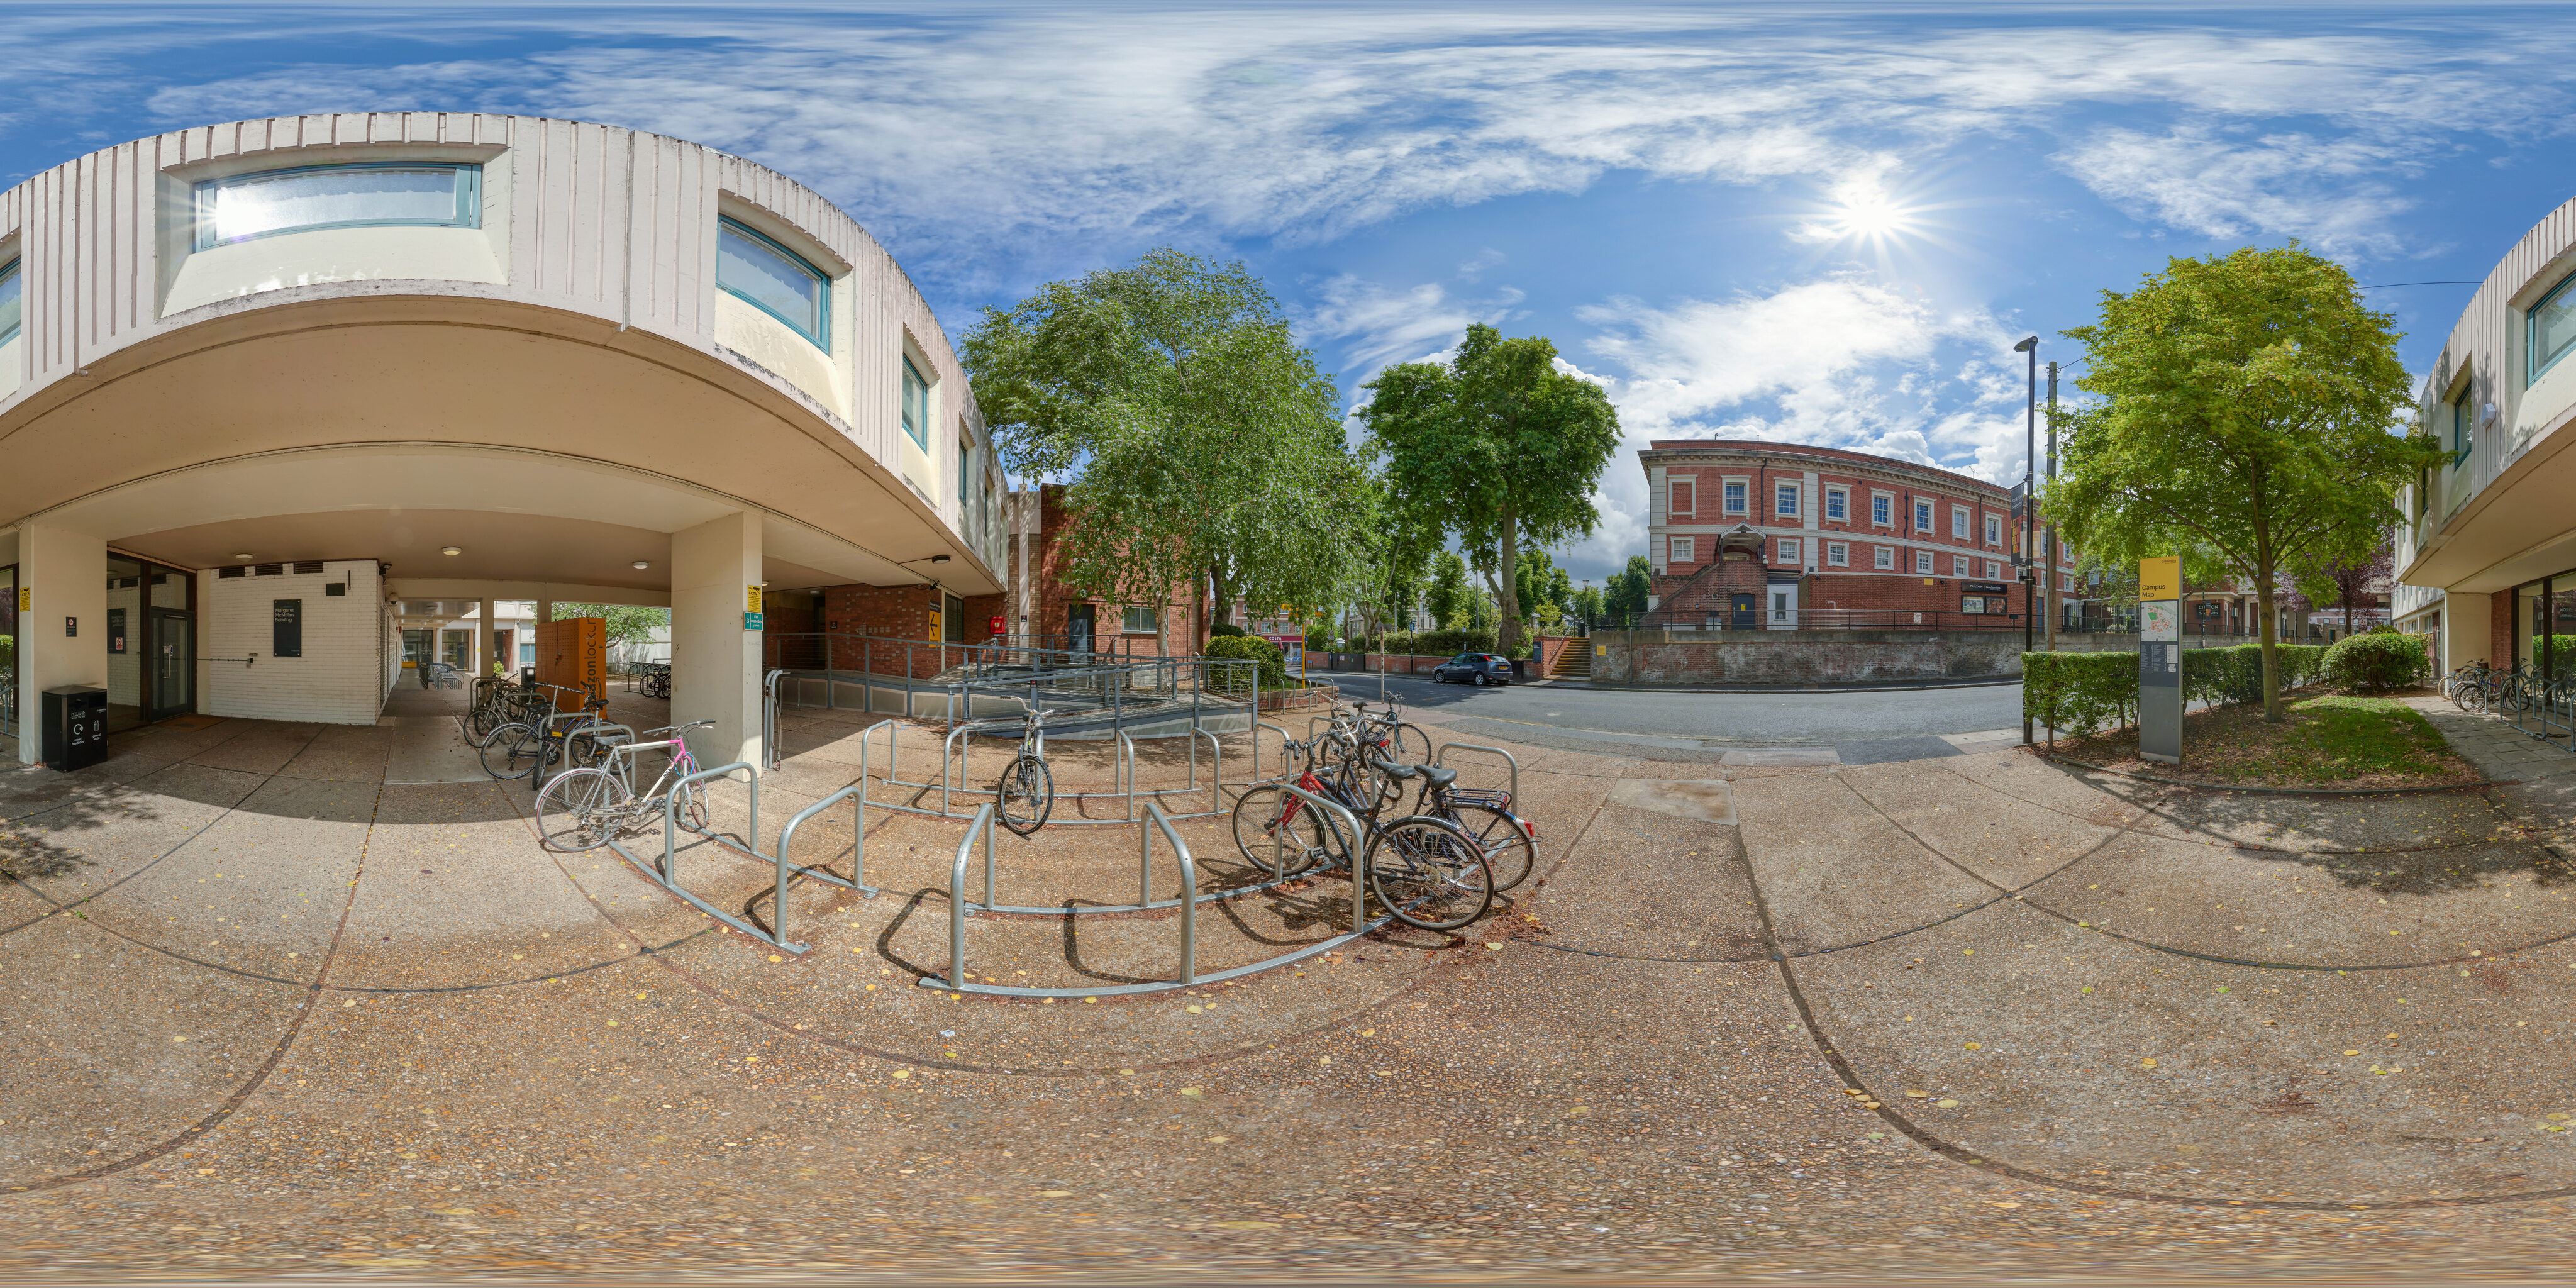 360 of Communal area outside the Margaret McMillan Building